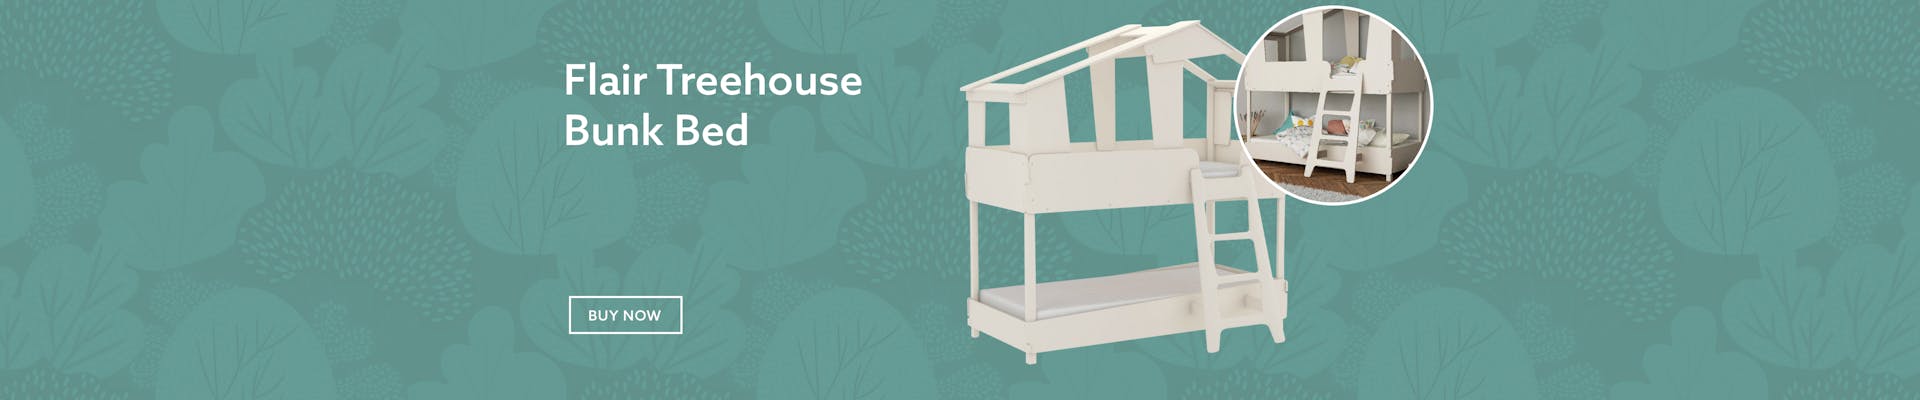 Flair Treehouse Bunk Bed